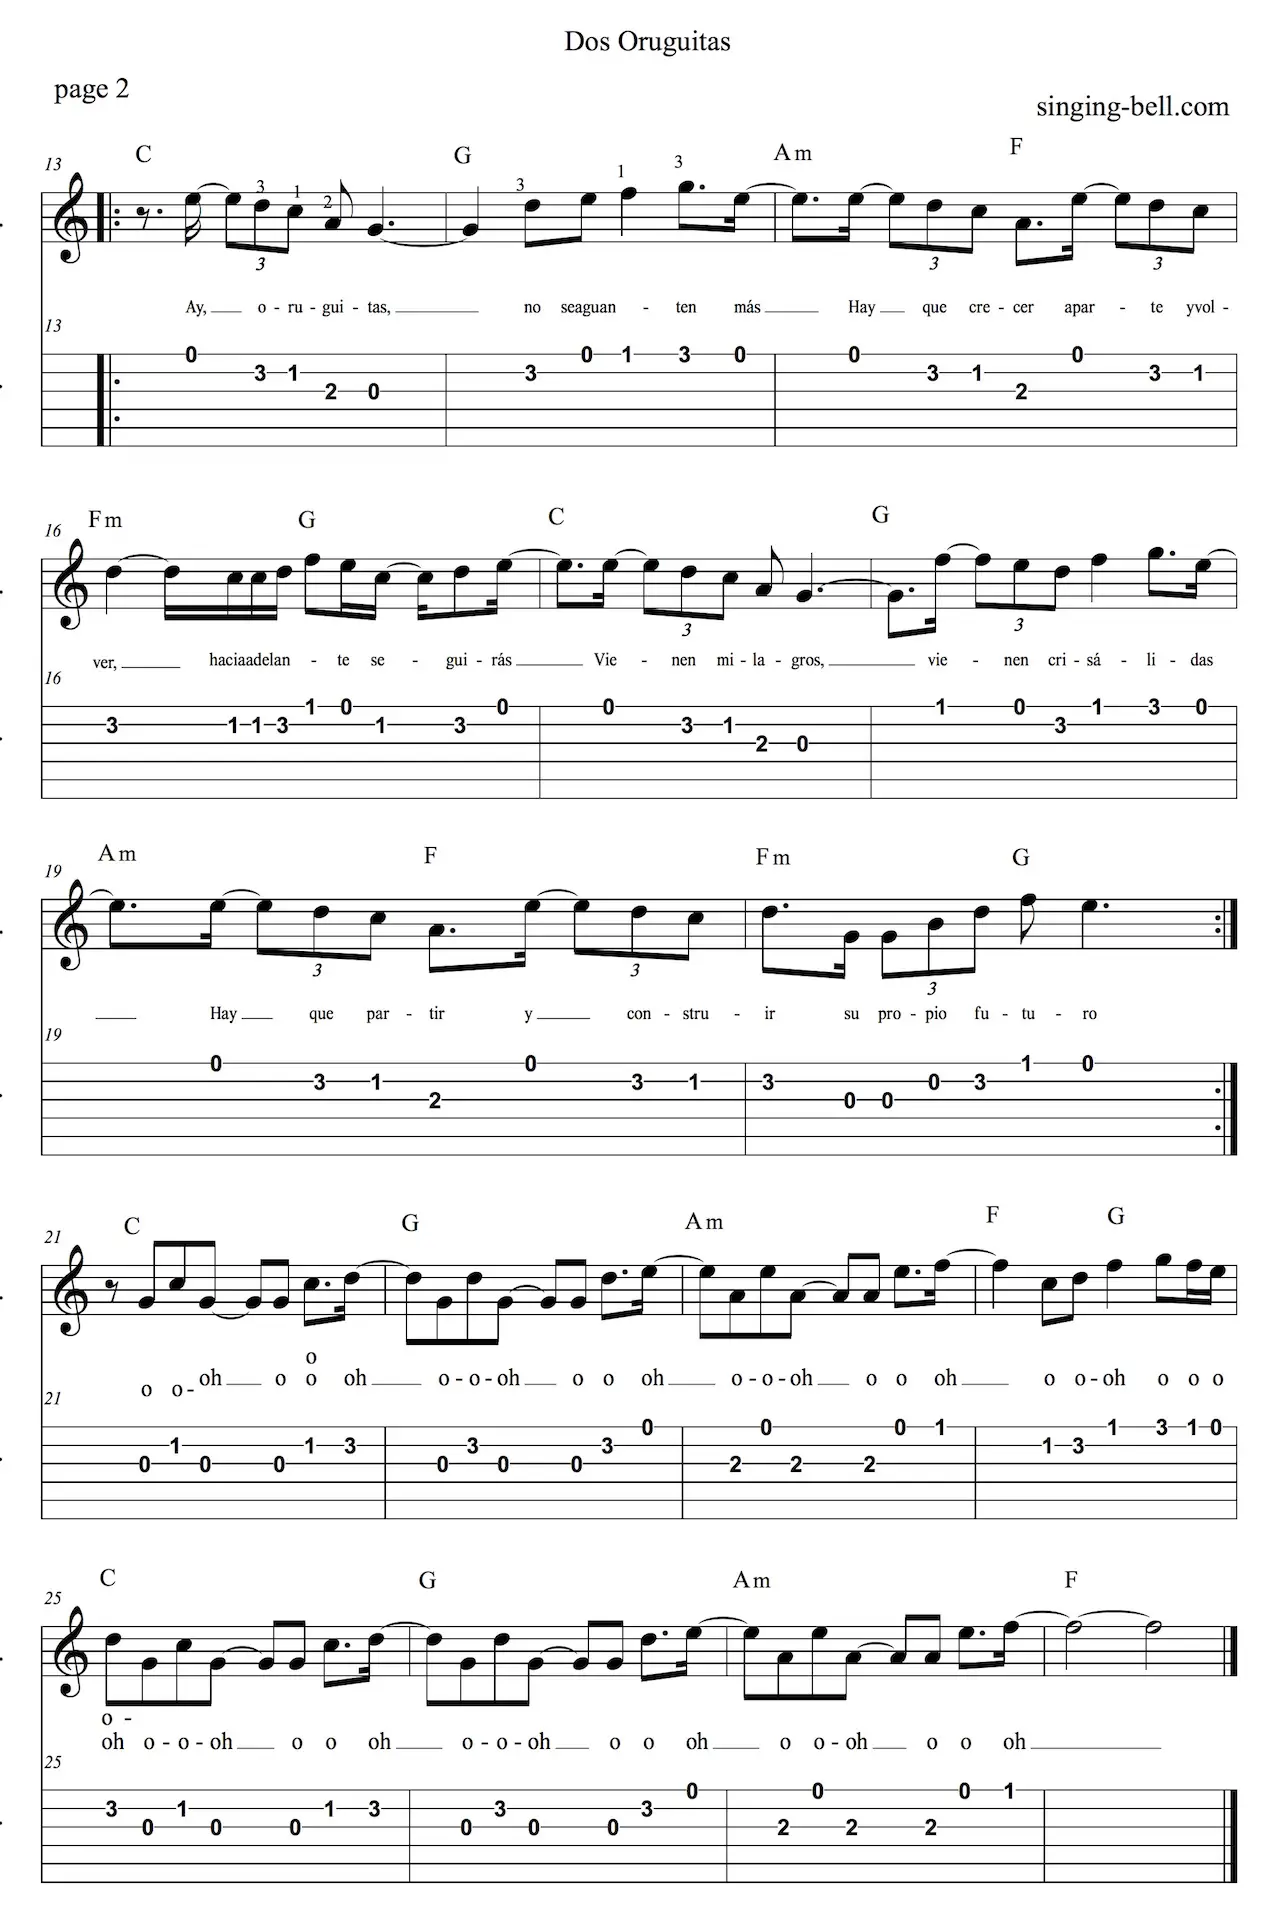 Dos Oruguitas Easy Guitar Sheet Music with notes and tablature page 2.